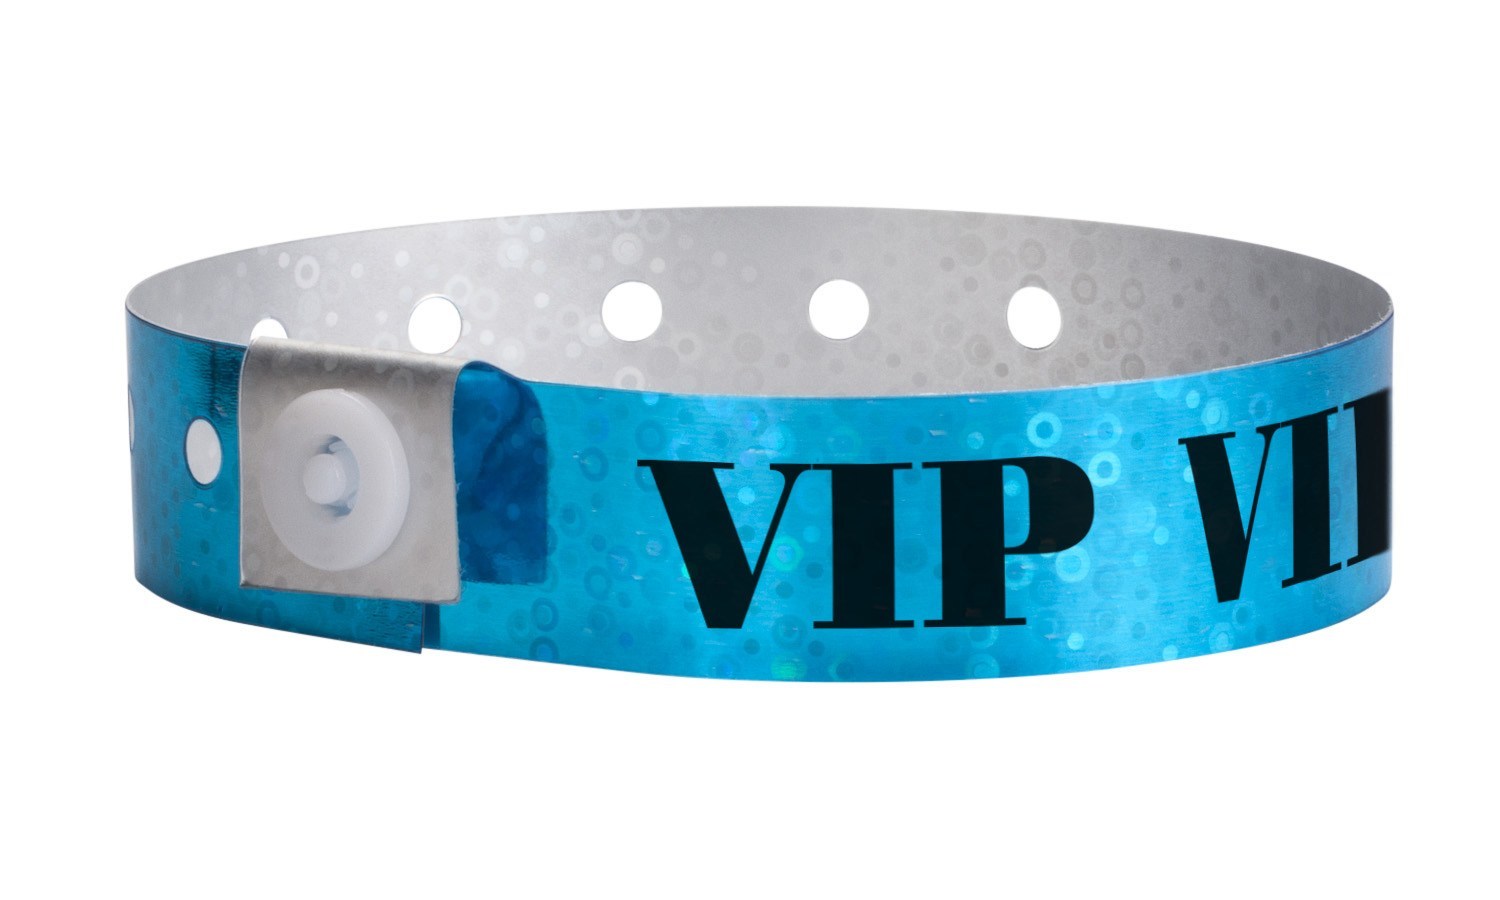 Holographic Wristbands - Largest Range of Colours & Styles | PDC